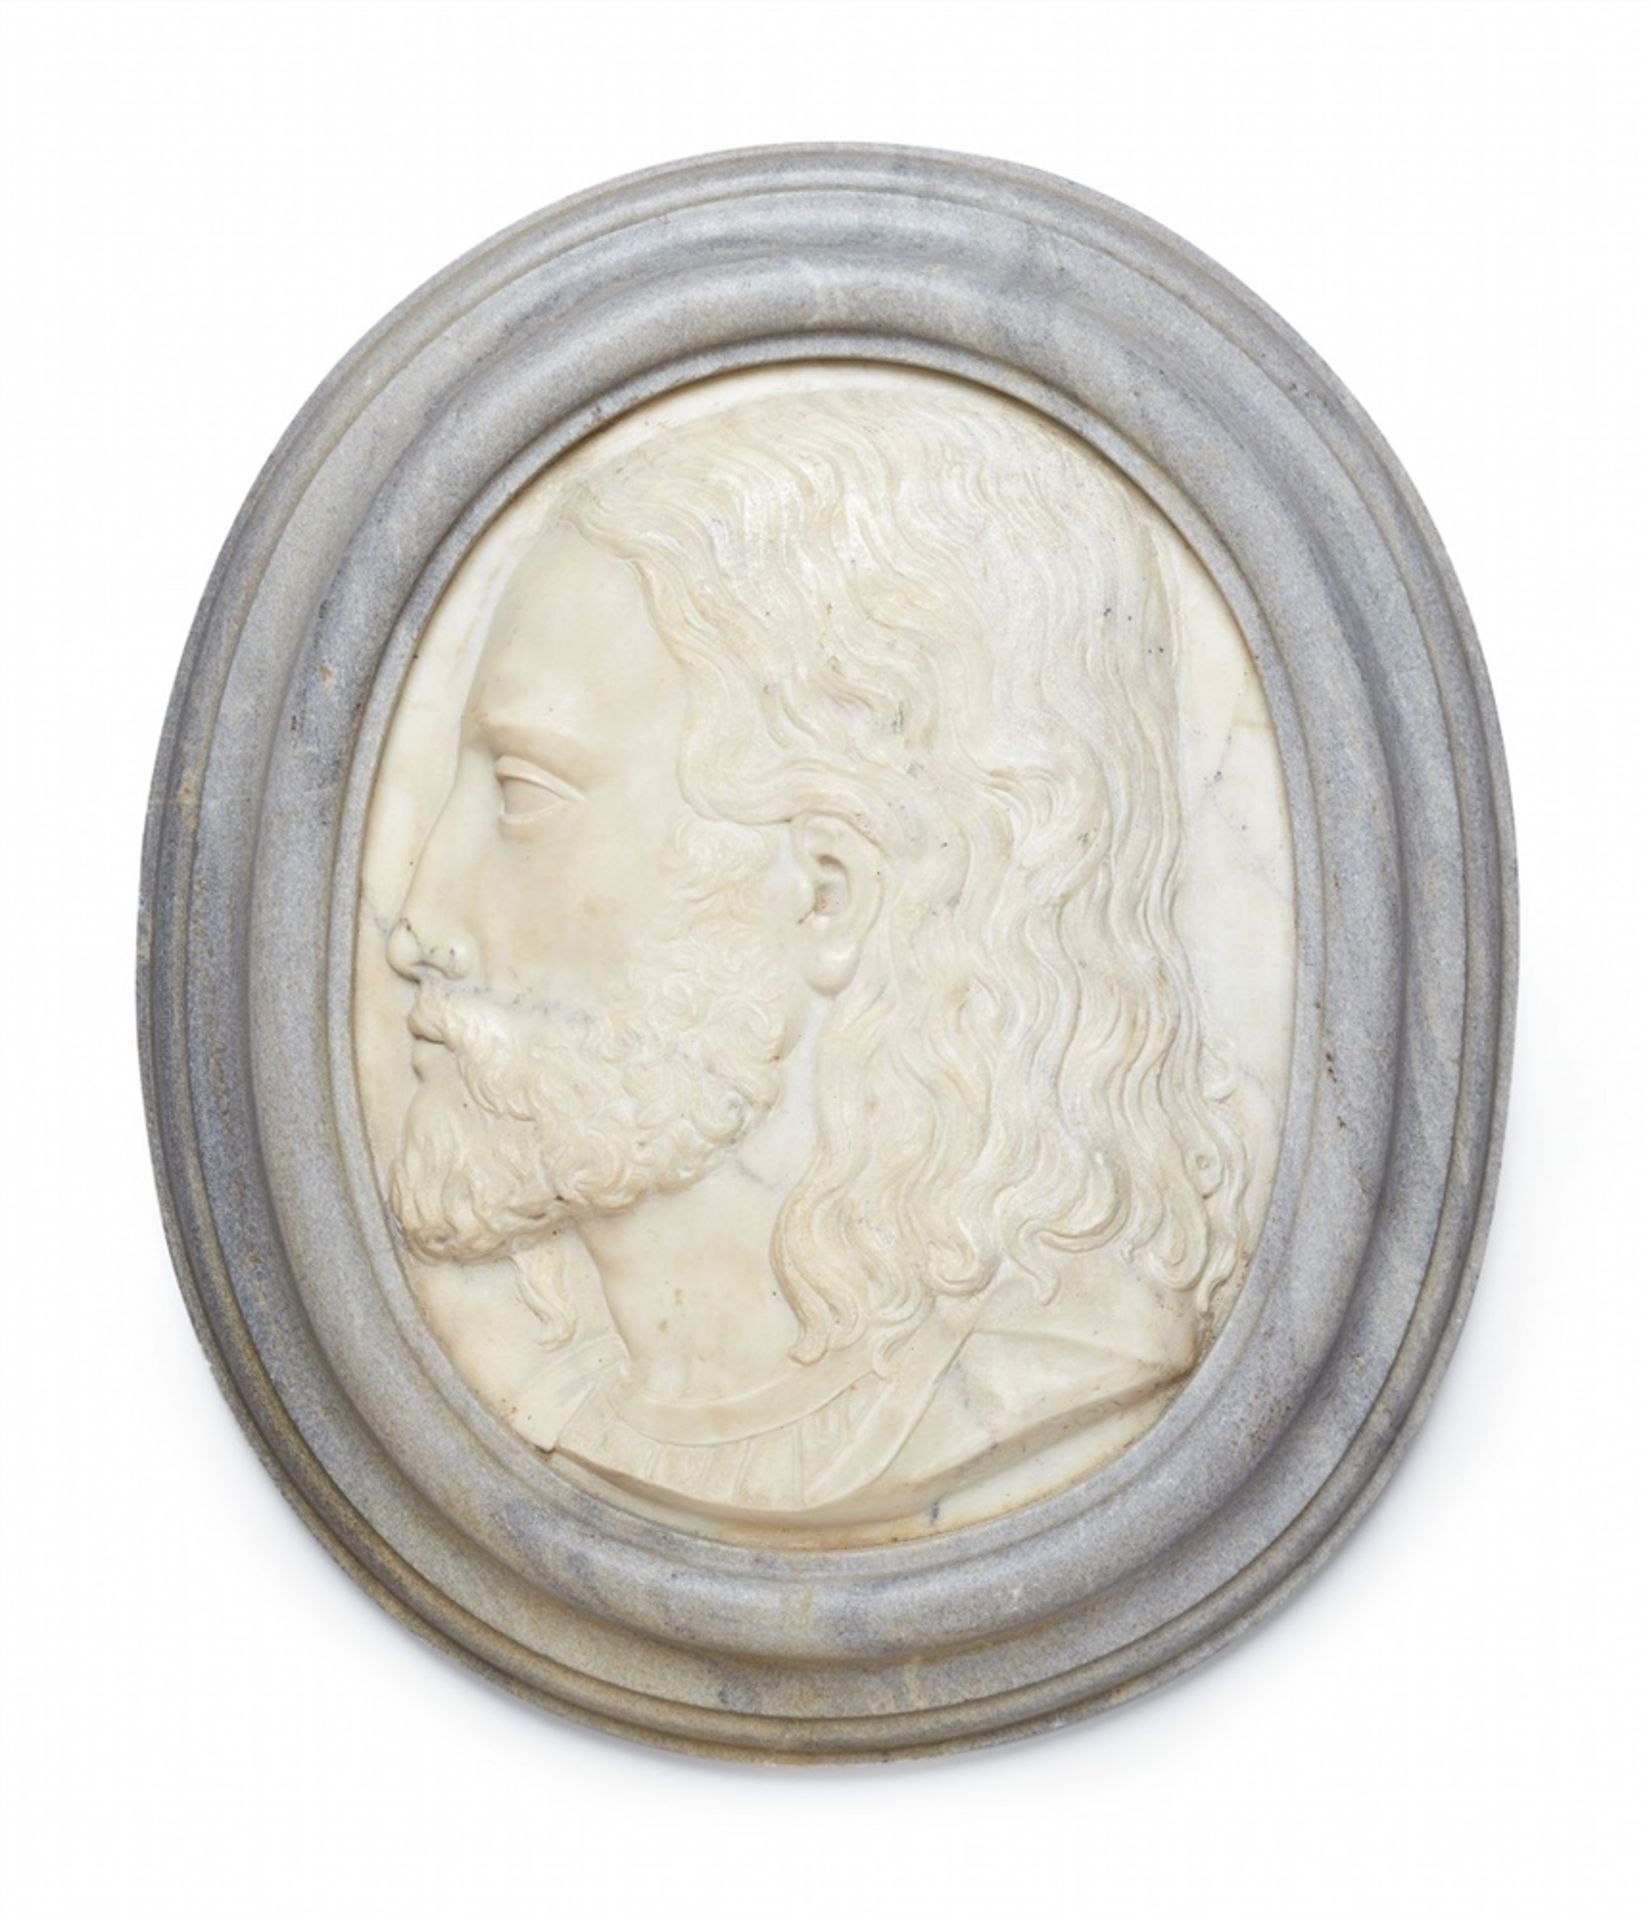 A marble relief plaque with the head of a young manOval white marble plaque depicting a bust of a